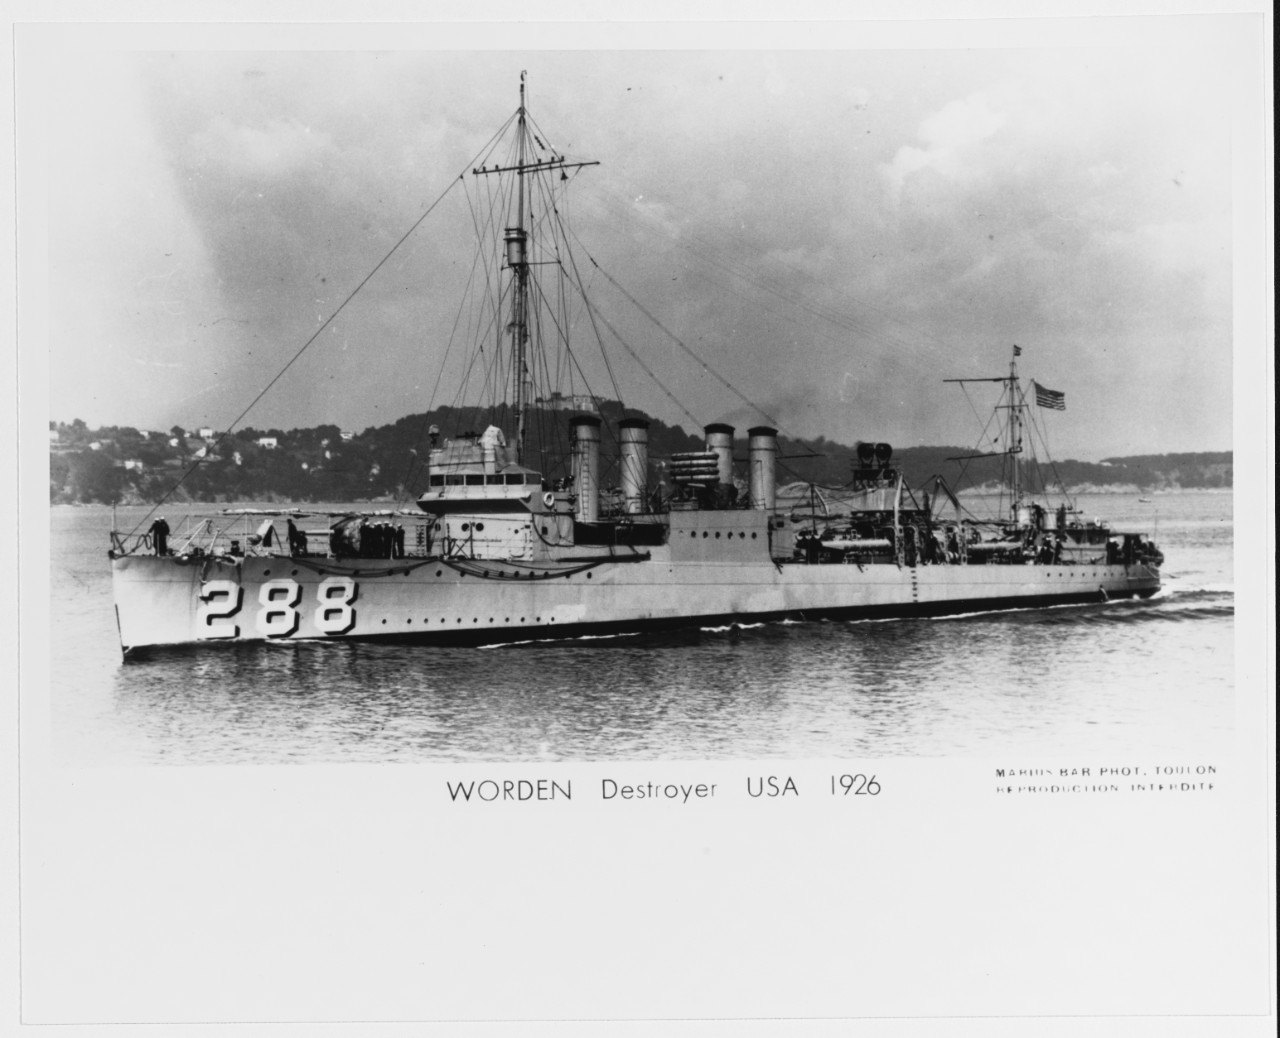 USS WORDEN (DD-288) at Toulon, France.